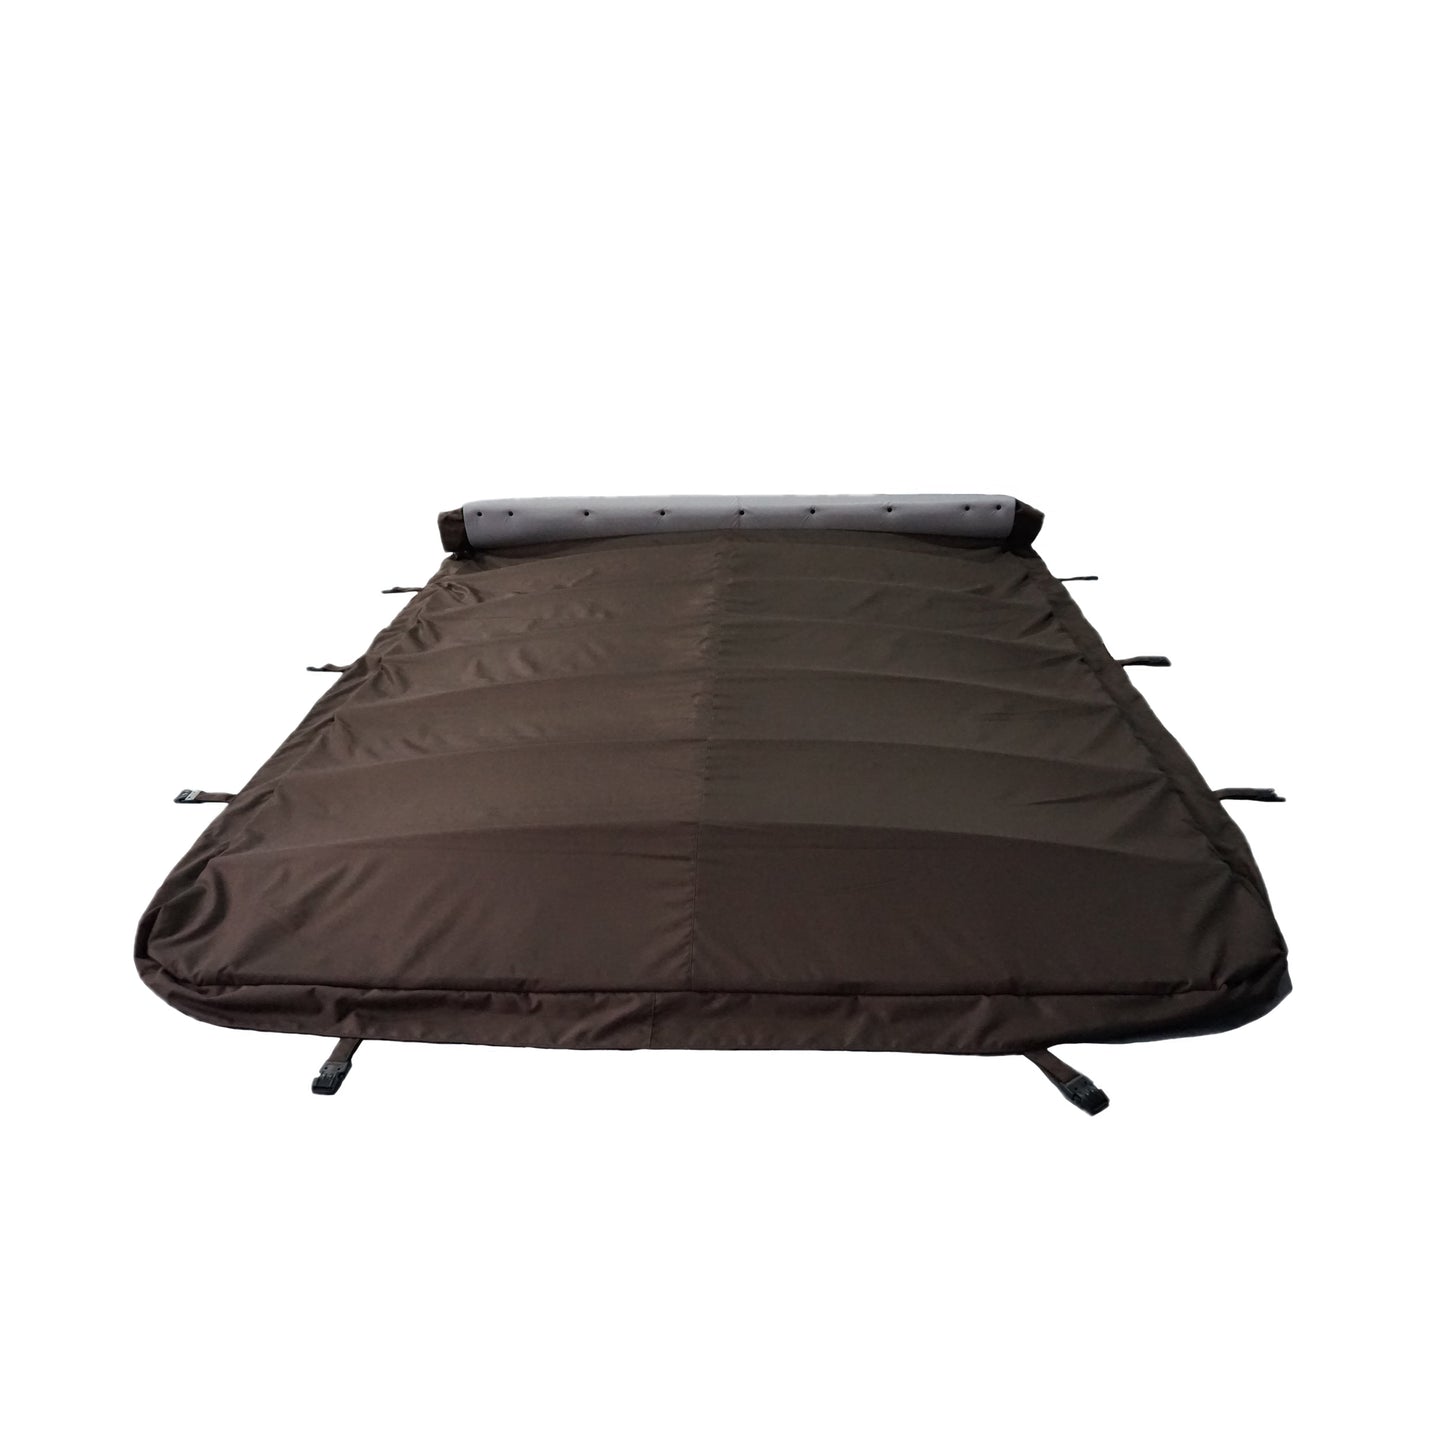 Rolling Spa Cover - 86 inch Spa - Brown